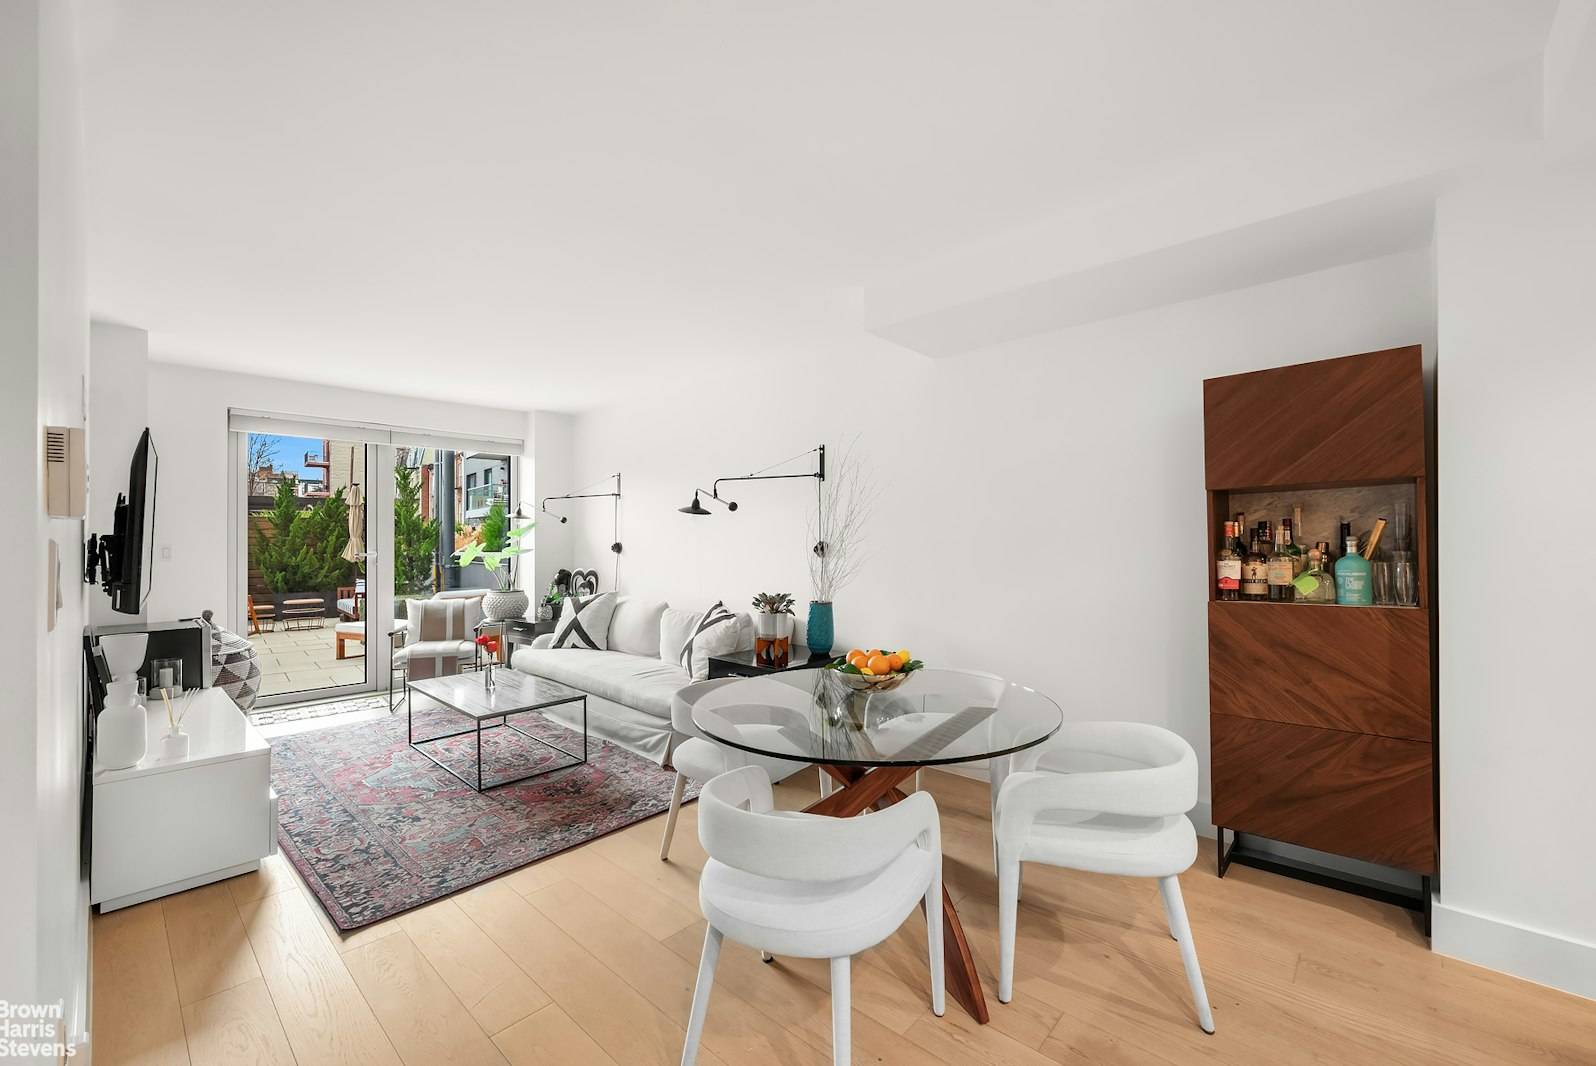 Step into luxury in this gorgeous 1BR residence with private 578sf outdoor terrace in South Slope.